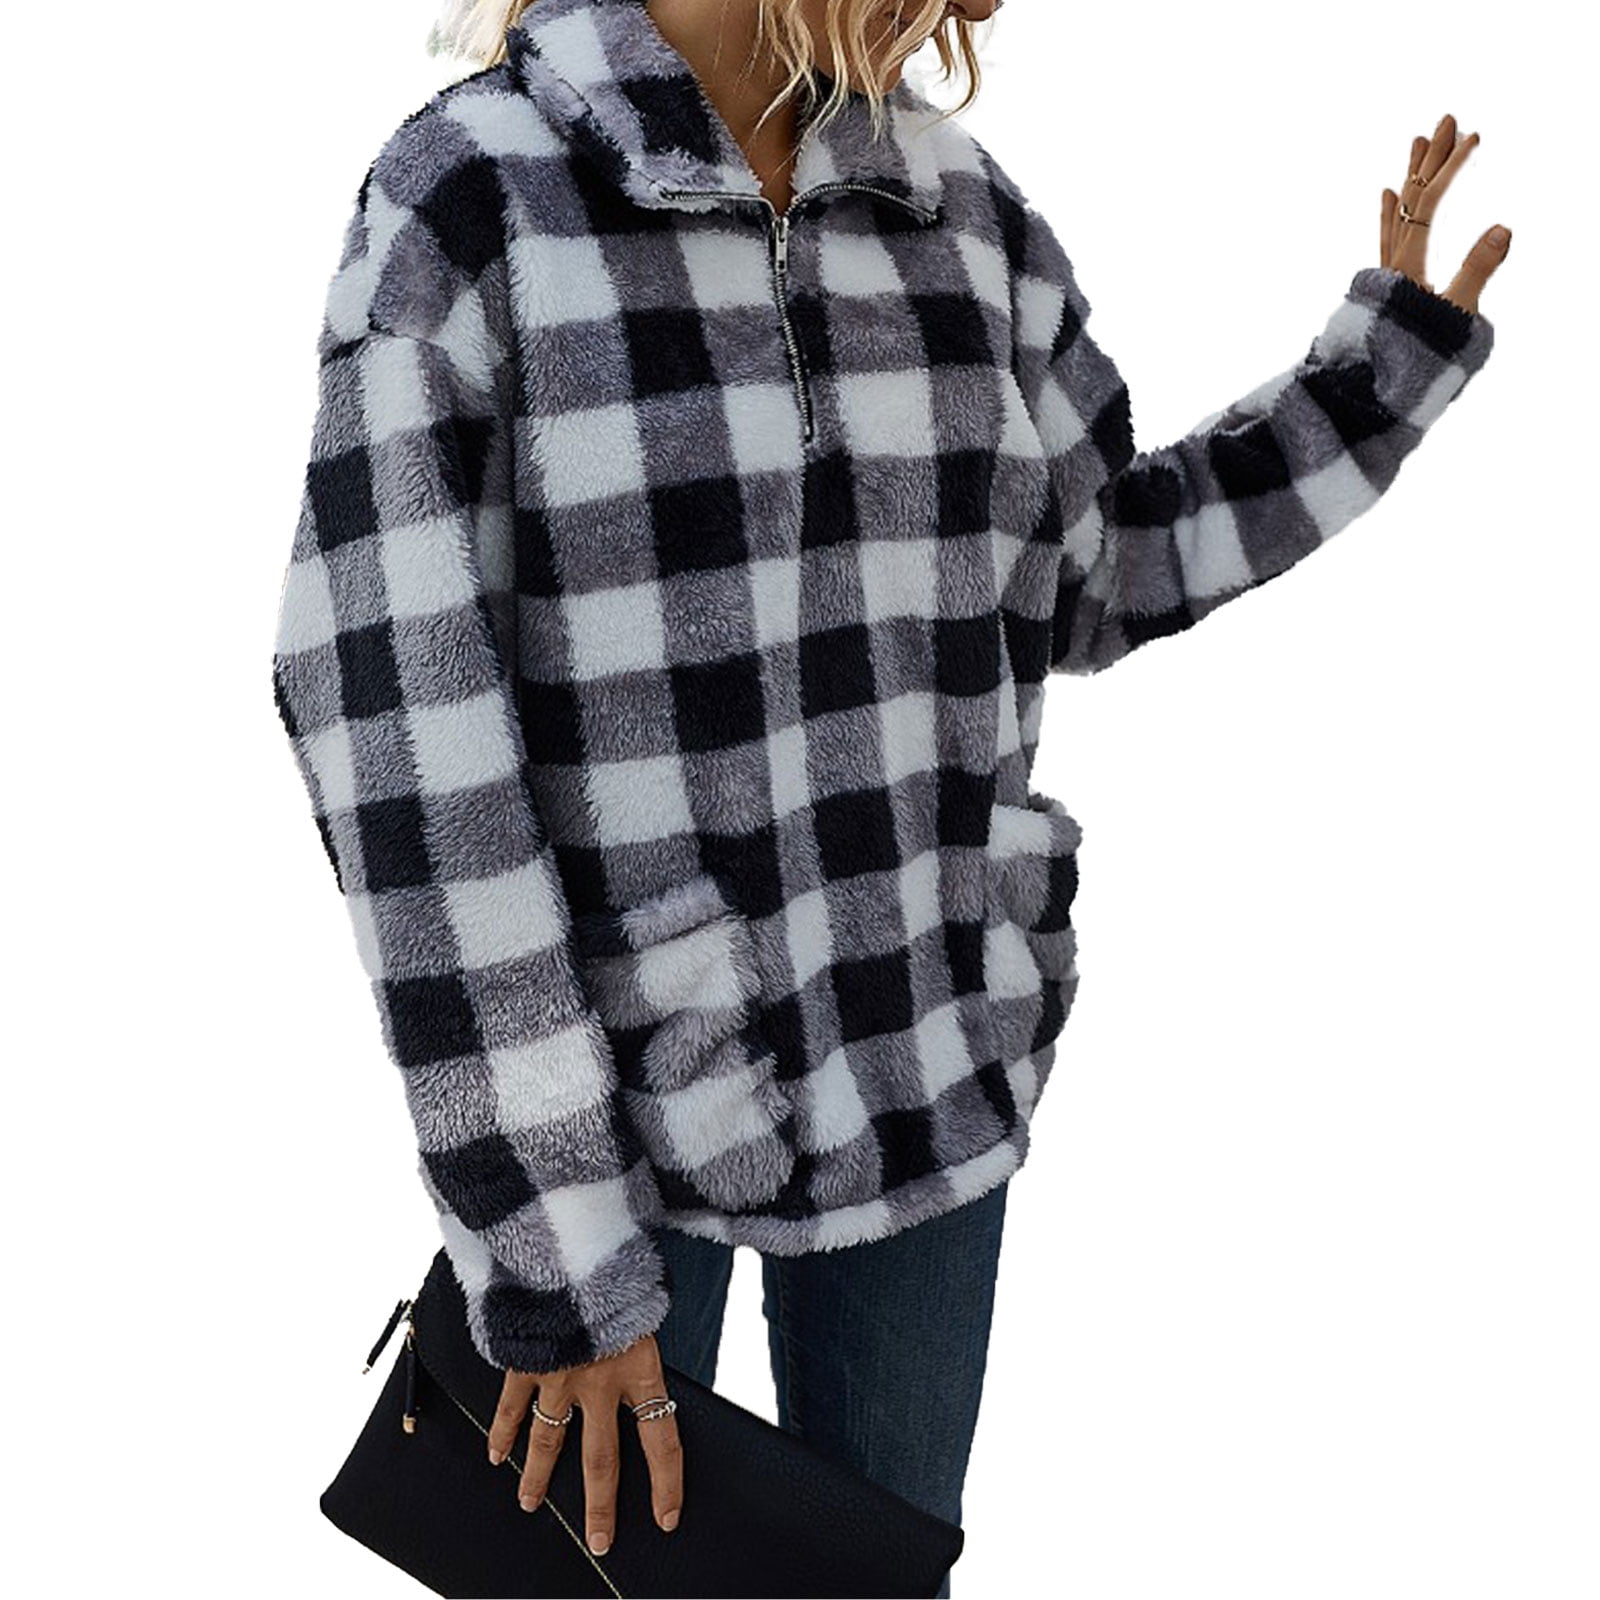 Fuzzy Pullover with Plaid Sweatshirts Tracksuit Women Casual Long Sleeve Turn Down Collar Front Zipper